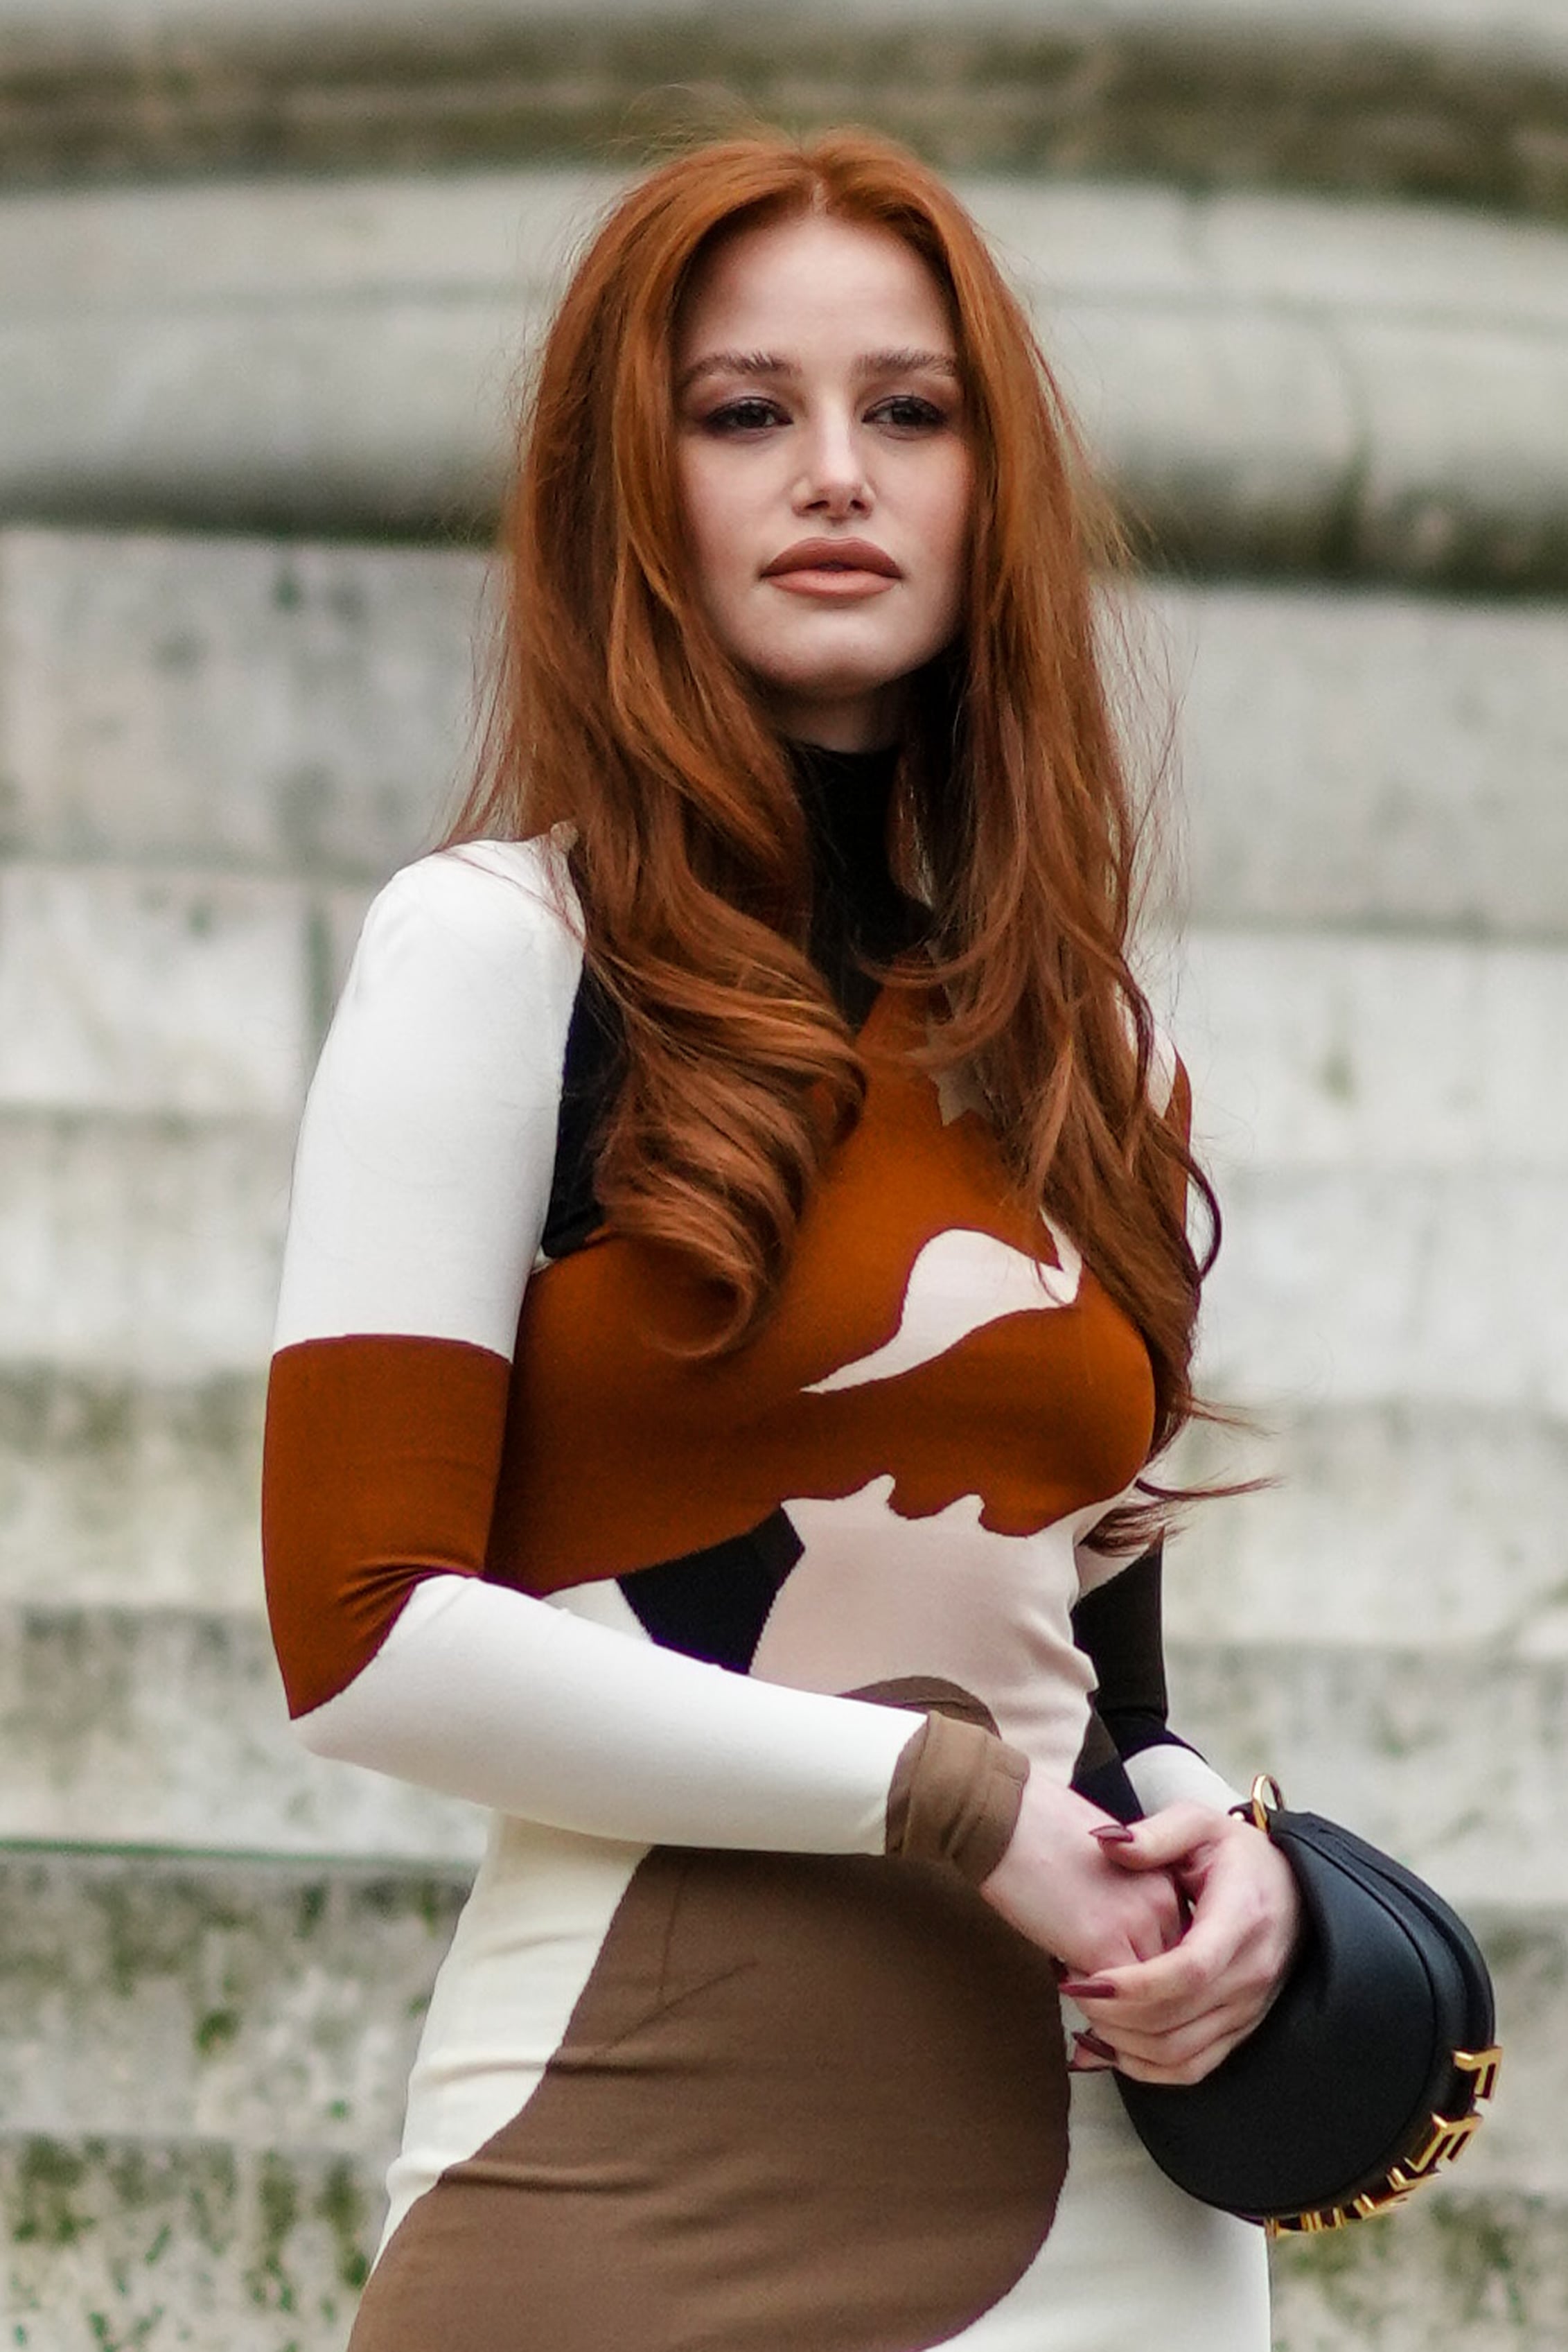 30 Copper Hair Color Ideas to Start Your Redhead Journey - Hair Adviser